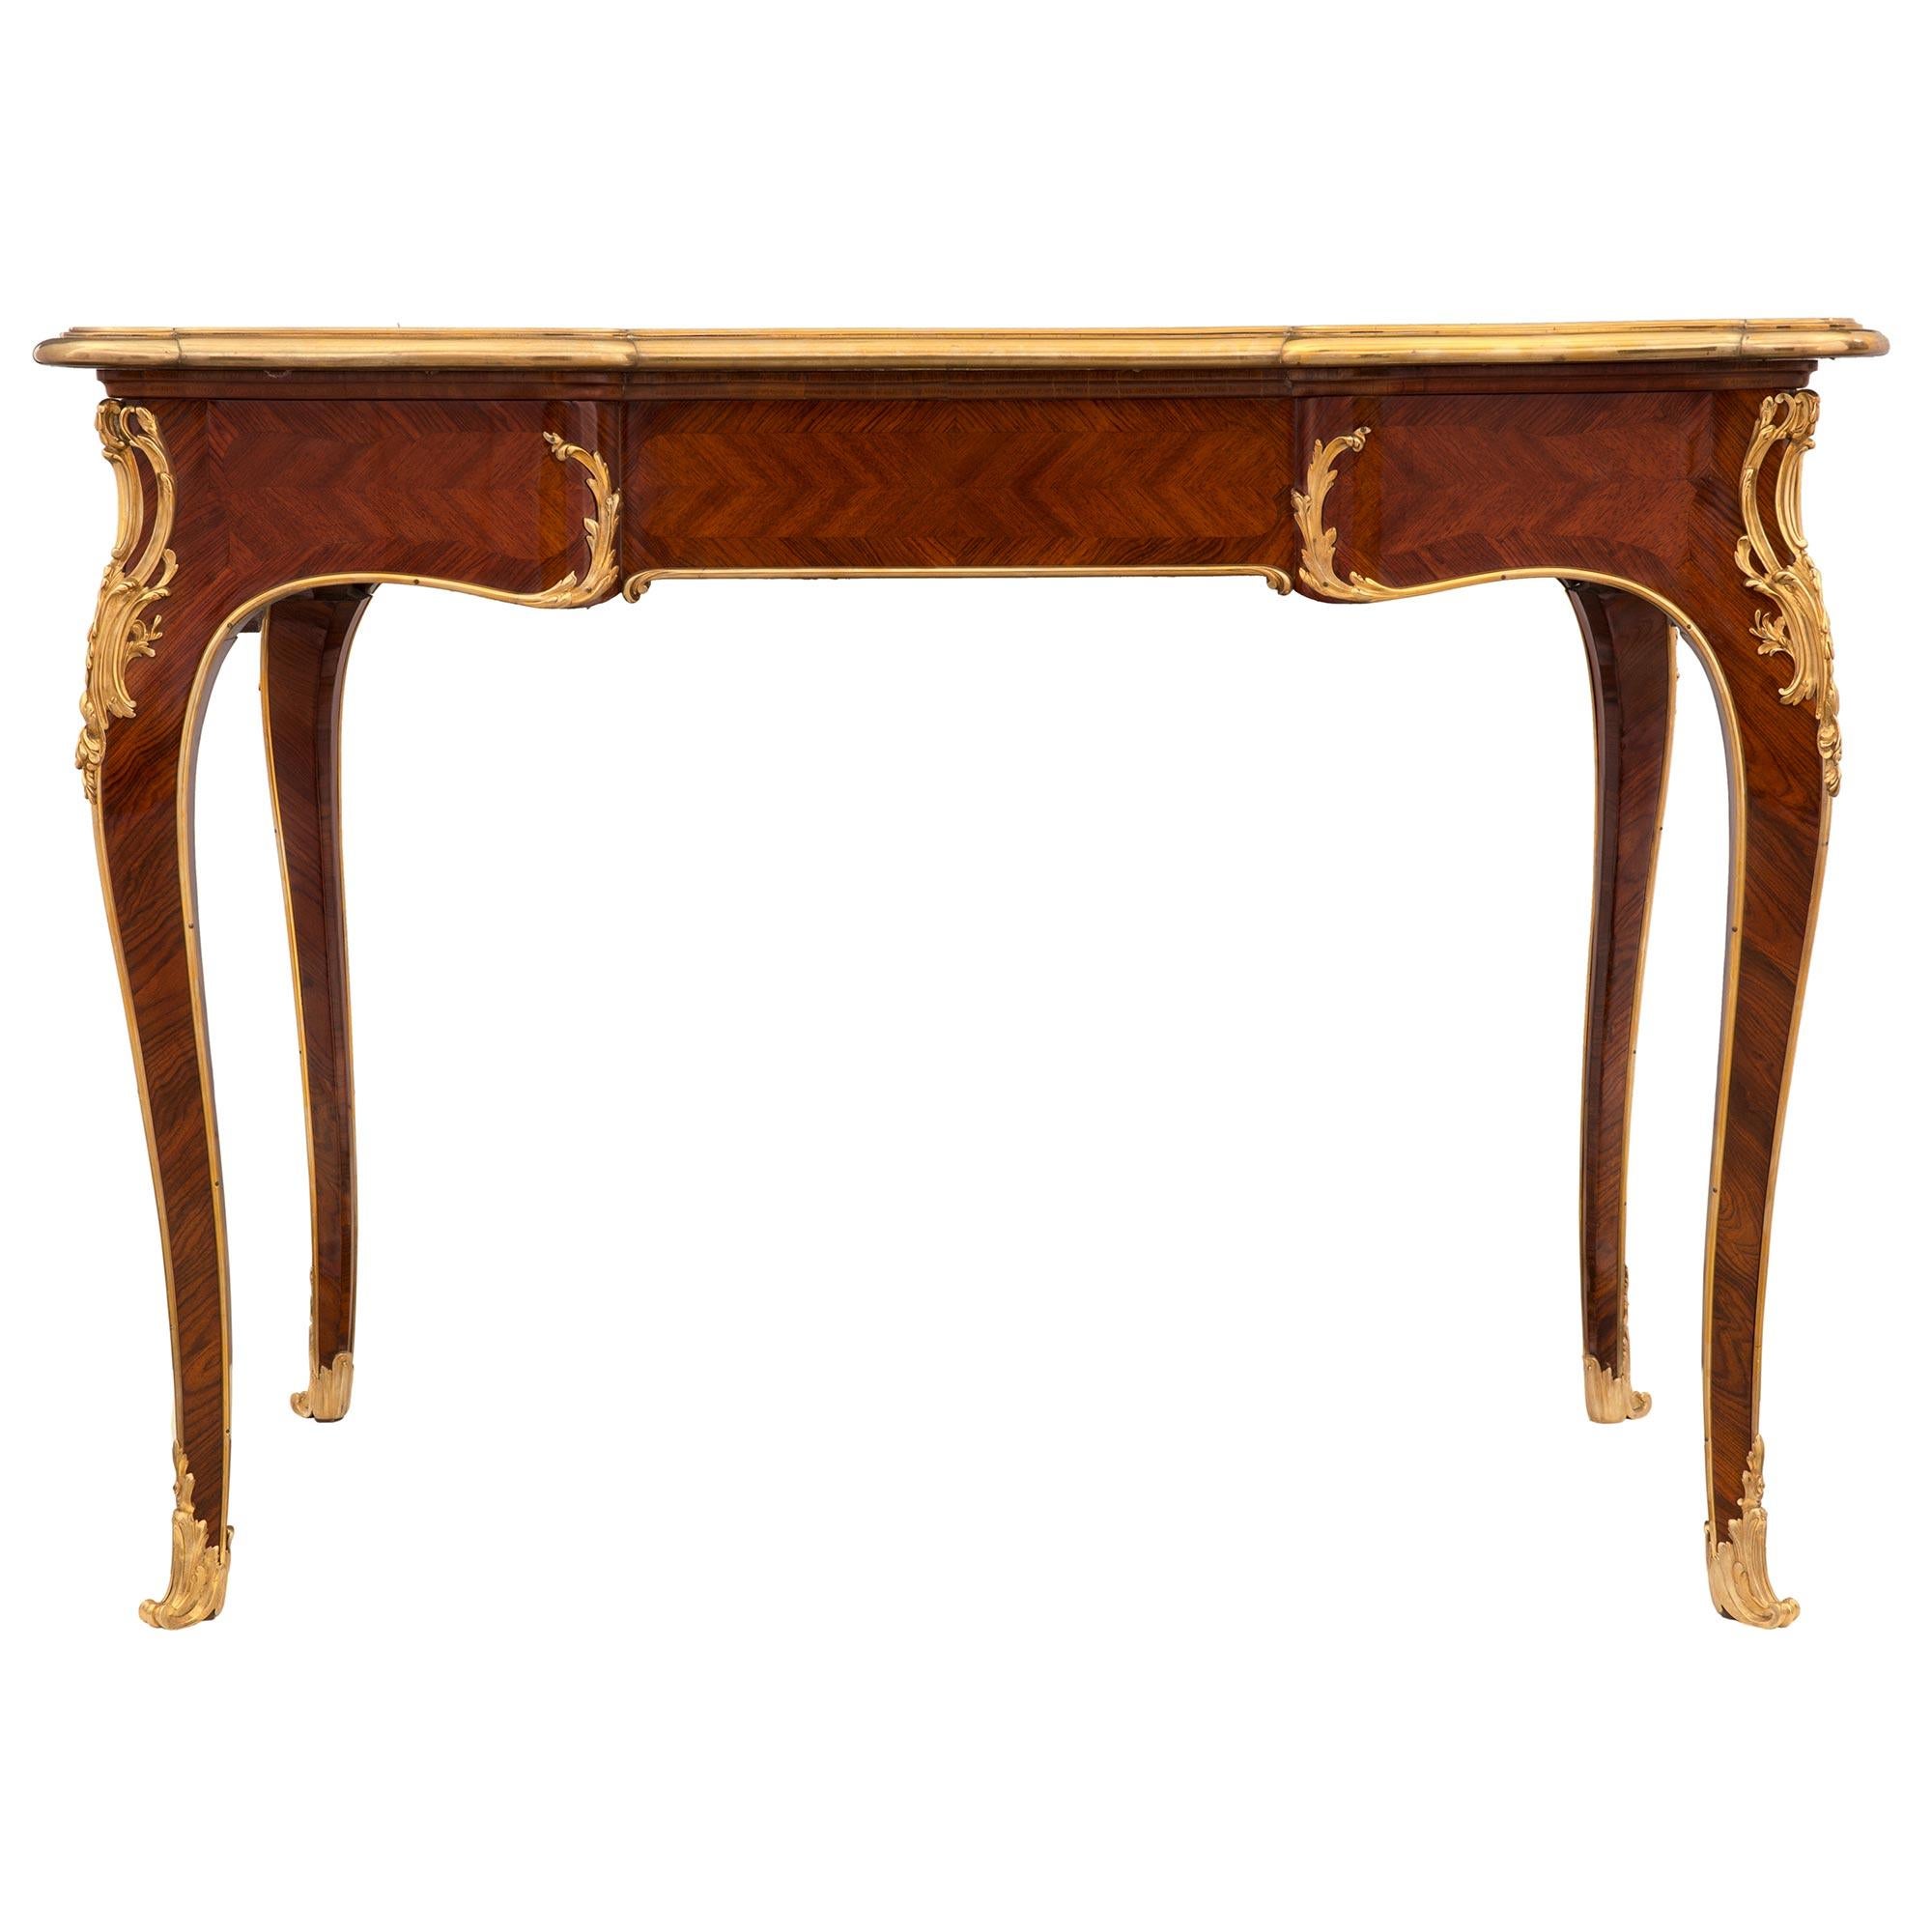 French Mid-19th Century Louis XV Style Kingwood and Ormolu Bureau Plat For Sale 8